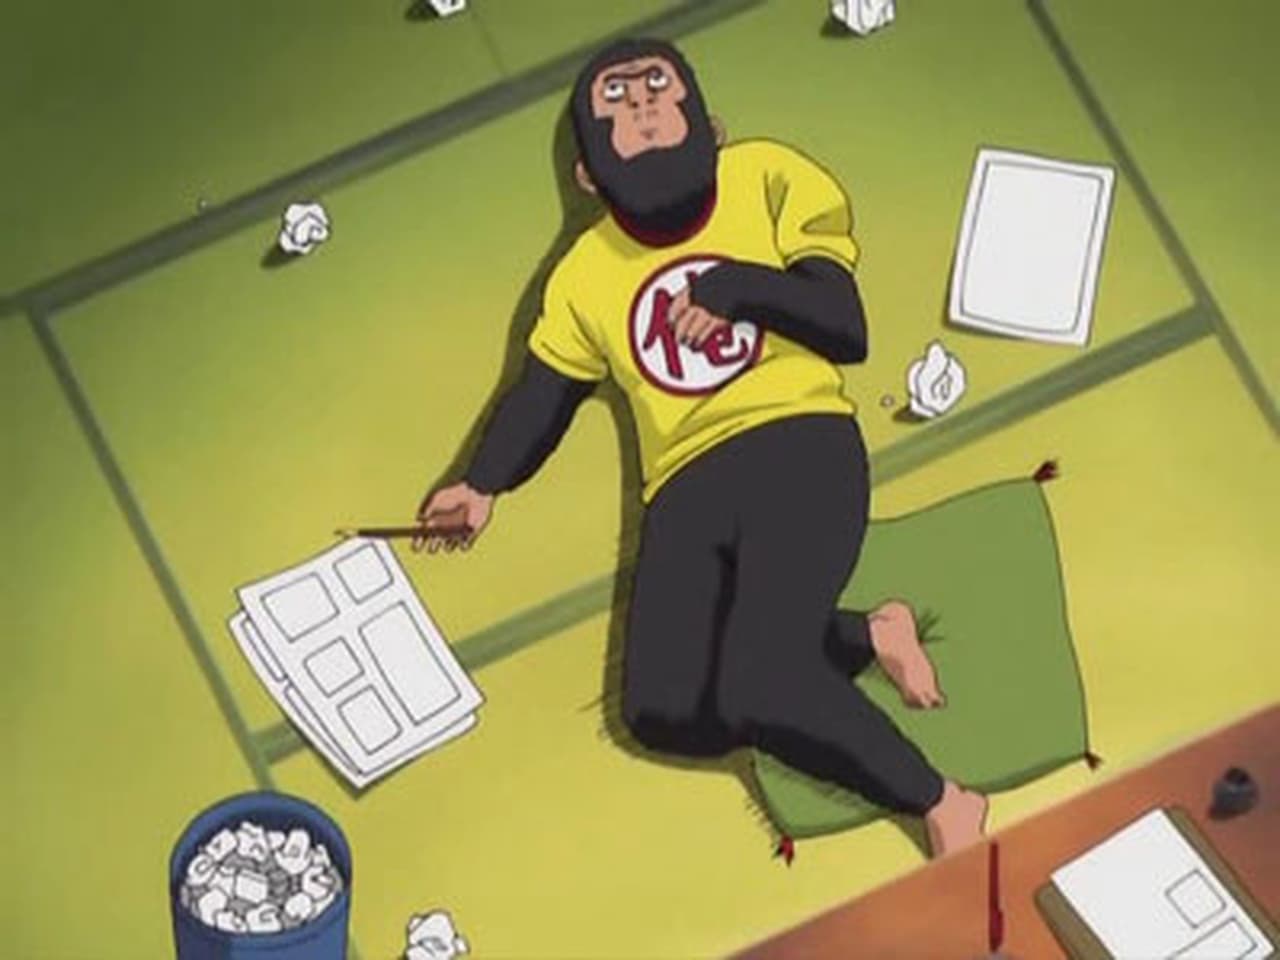 Gintama - Season 2 Episode 26 : Don’t Complain About Your Job at Home, Do It Somewhere Else